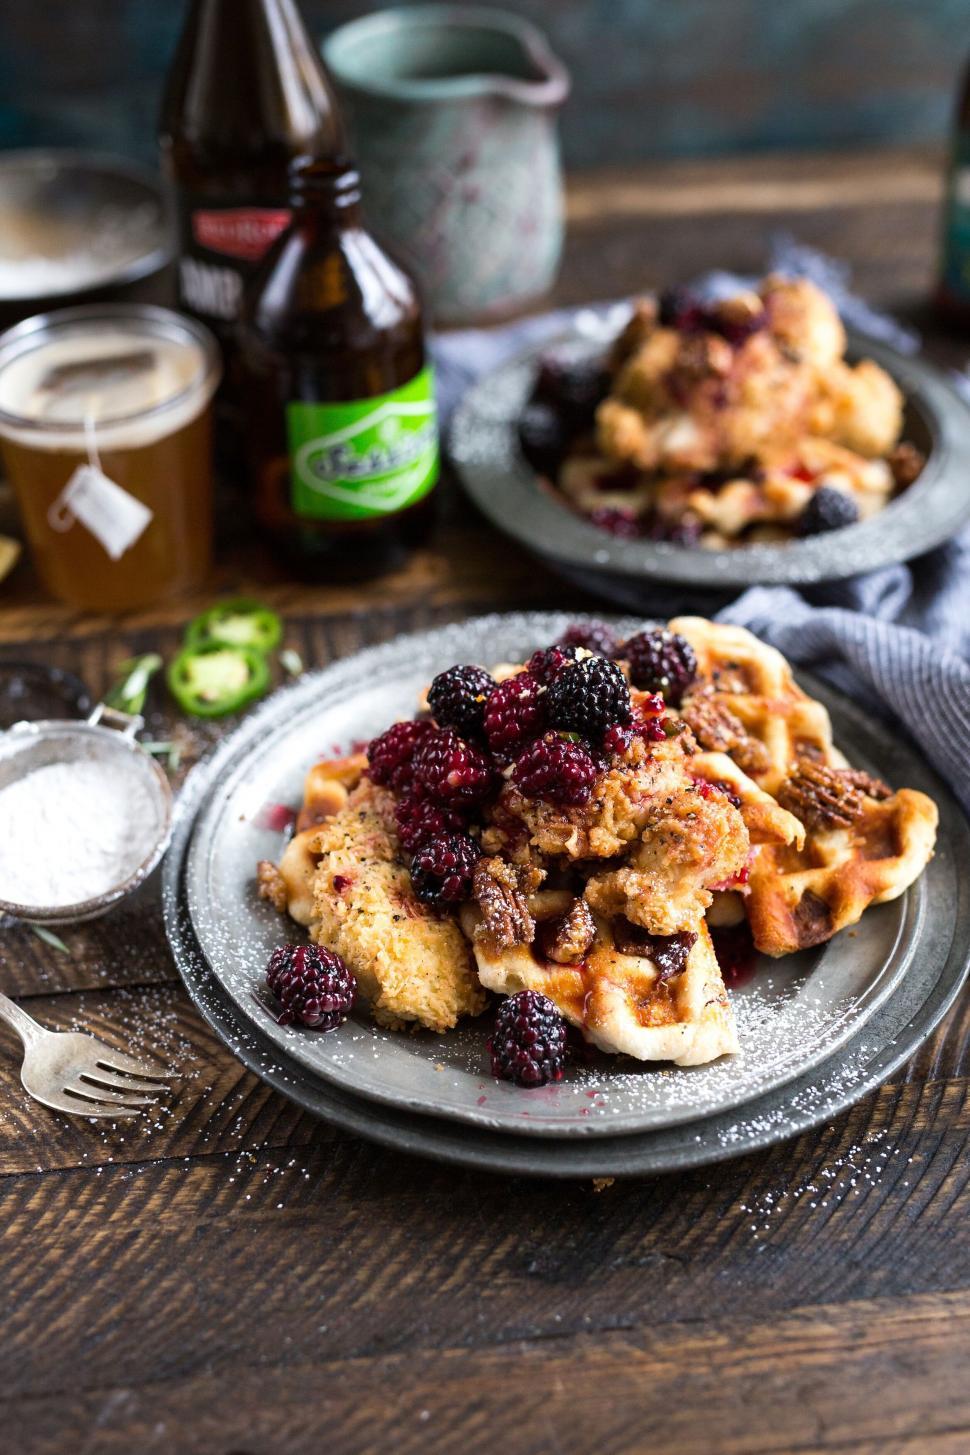 Free Image of Rustic waffle breakfast with refreshing beer 